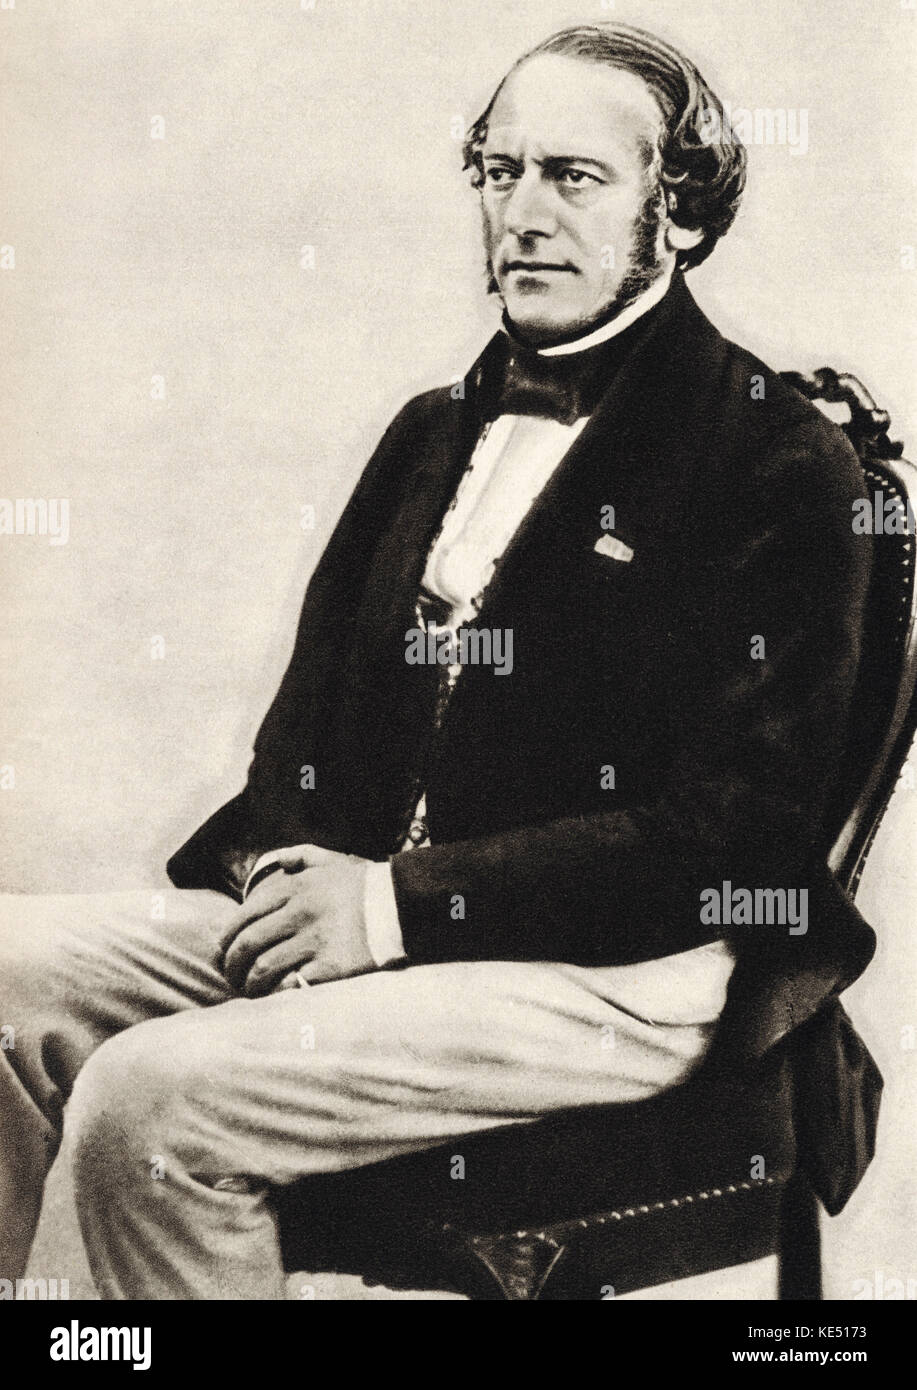 Richard Wagner - portrait of the German composer. German composer, 22 May 1813 - 13 February 1883. Stock Photo